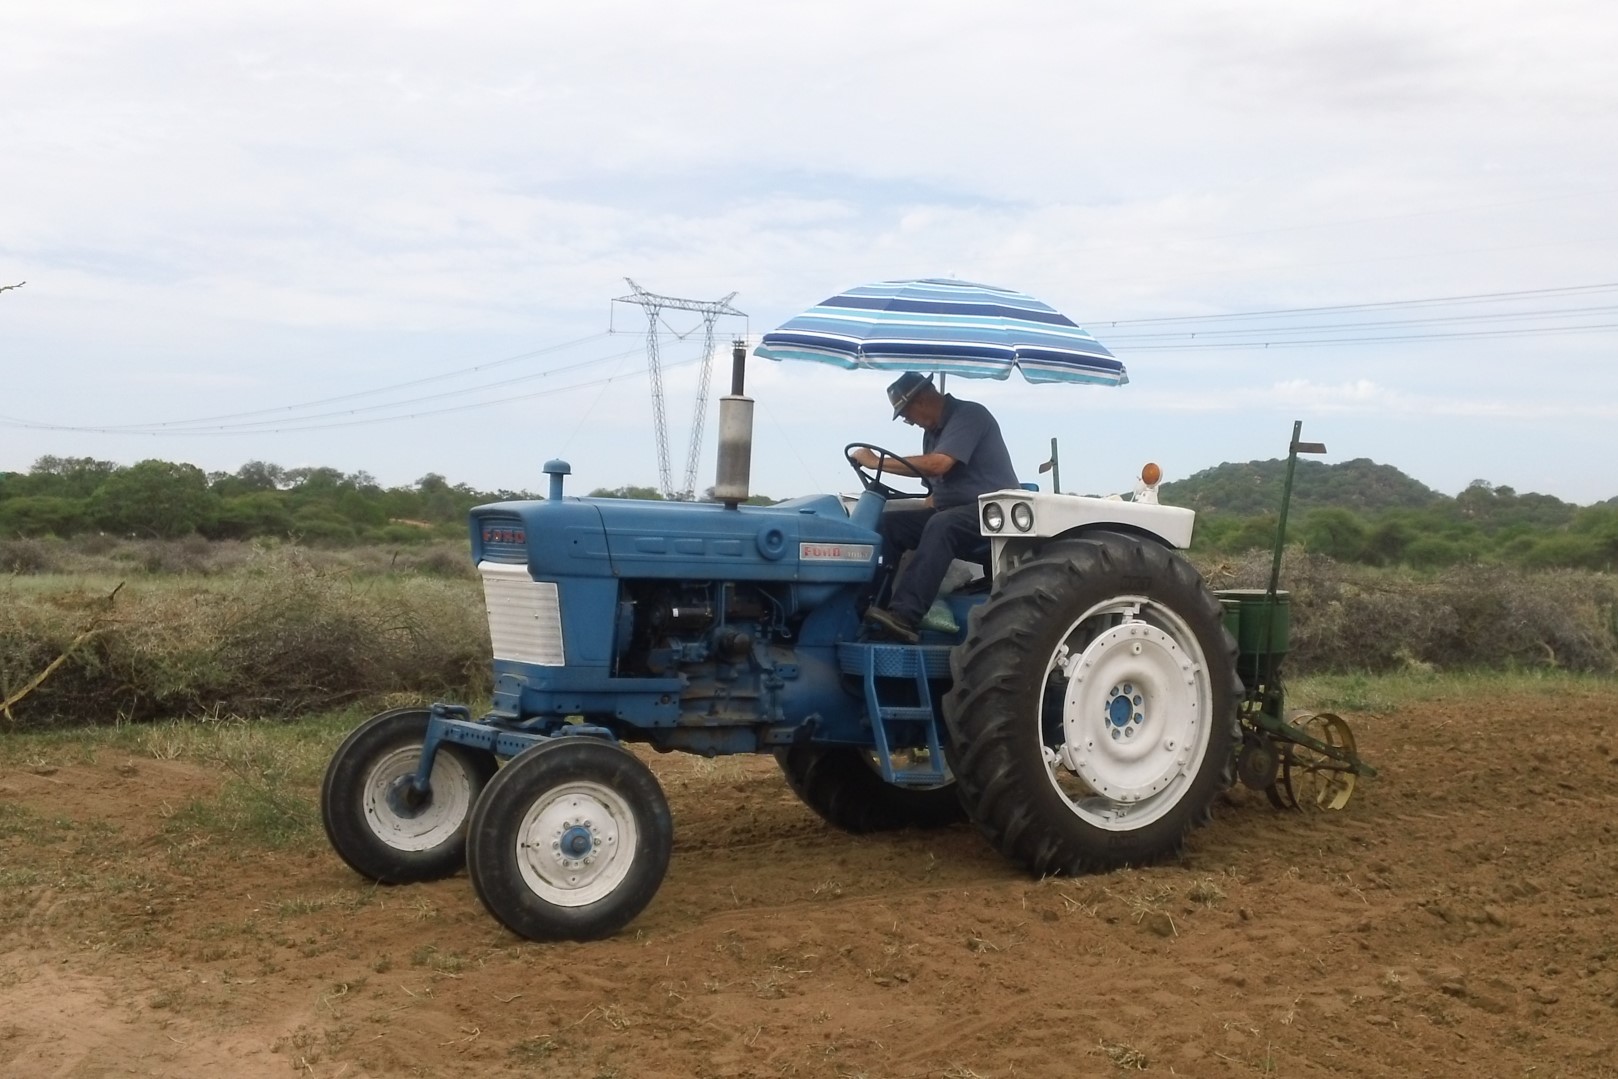 Faithful partner, Bob Luckhurst on the tractor he donated along with friends in the States